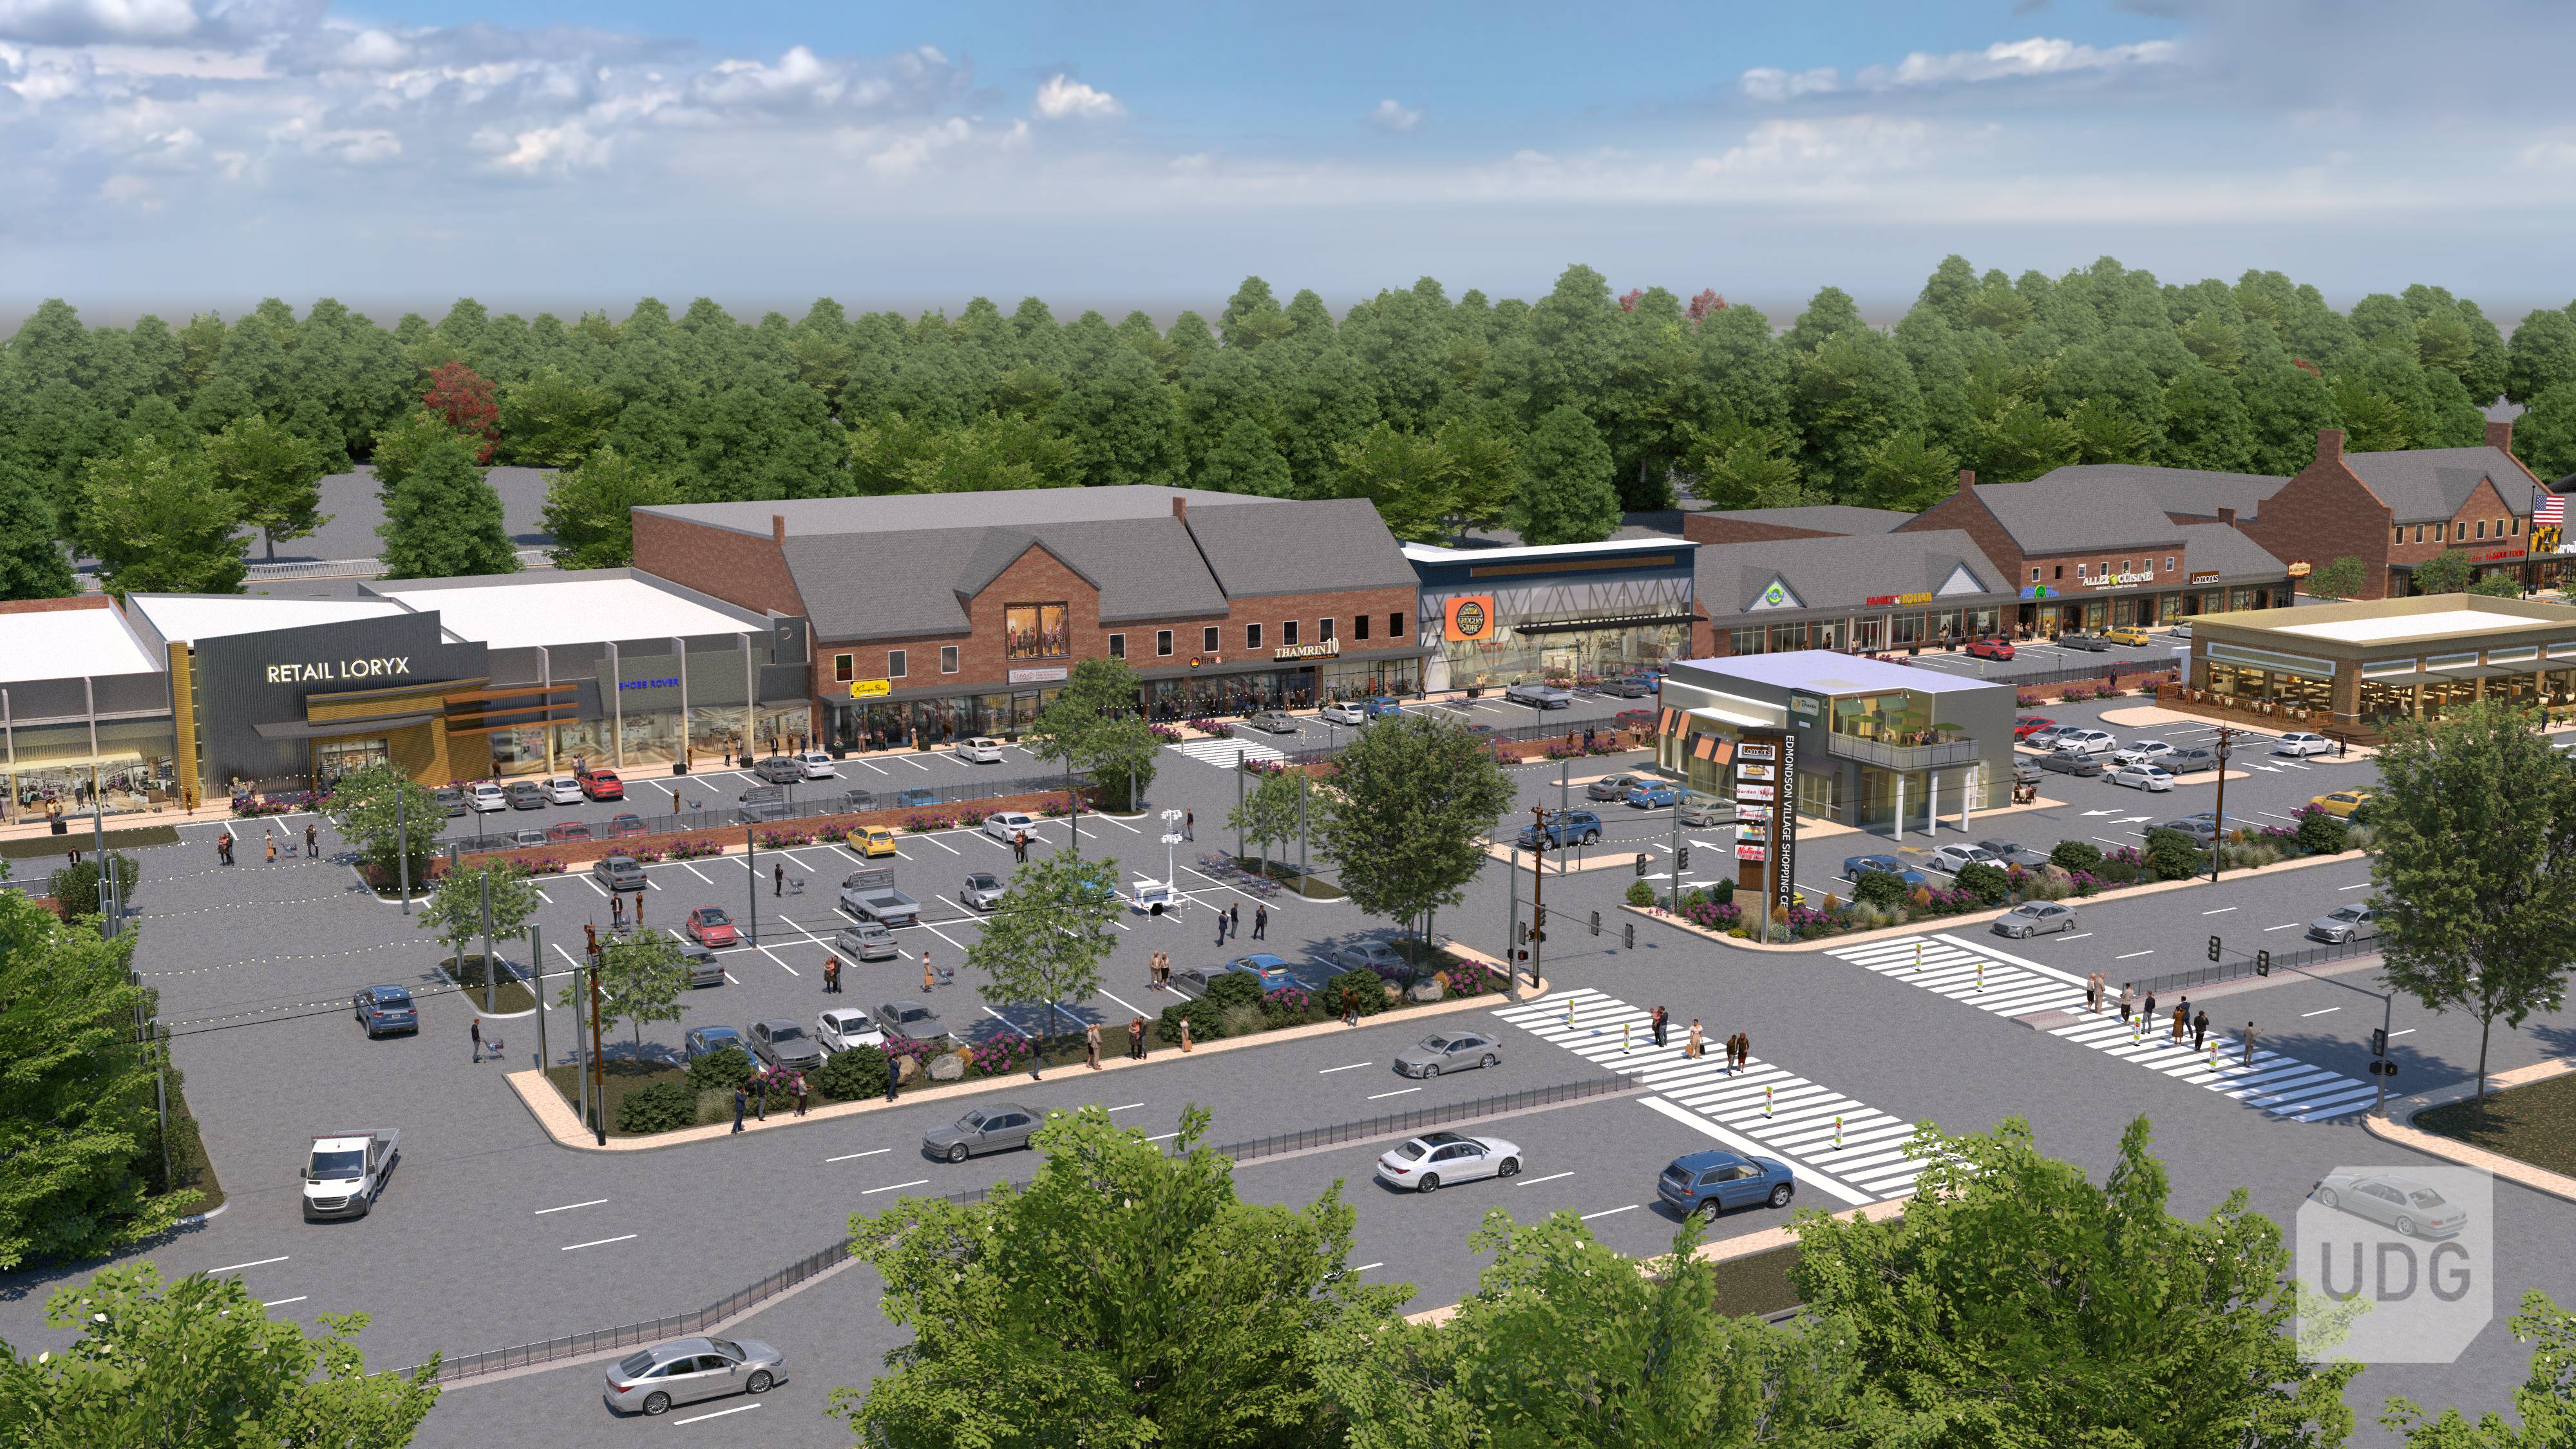 The Edmondson Village Shopping Center sits on land under a 1945 covenant. A Chicago-based developer had to get parts of it amended to move forward with the purchase and future redevelopment of the strip mall.